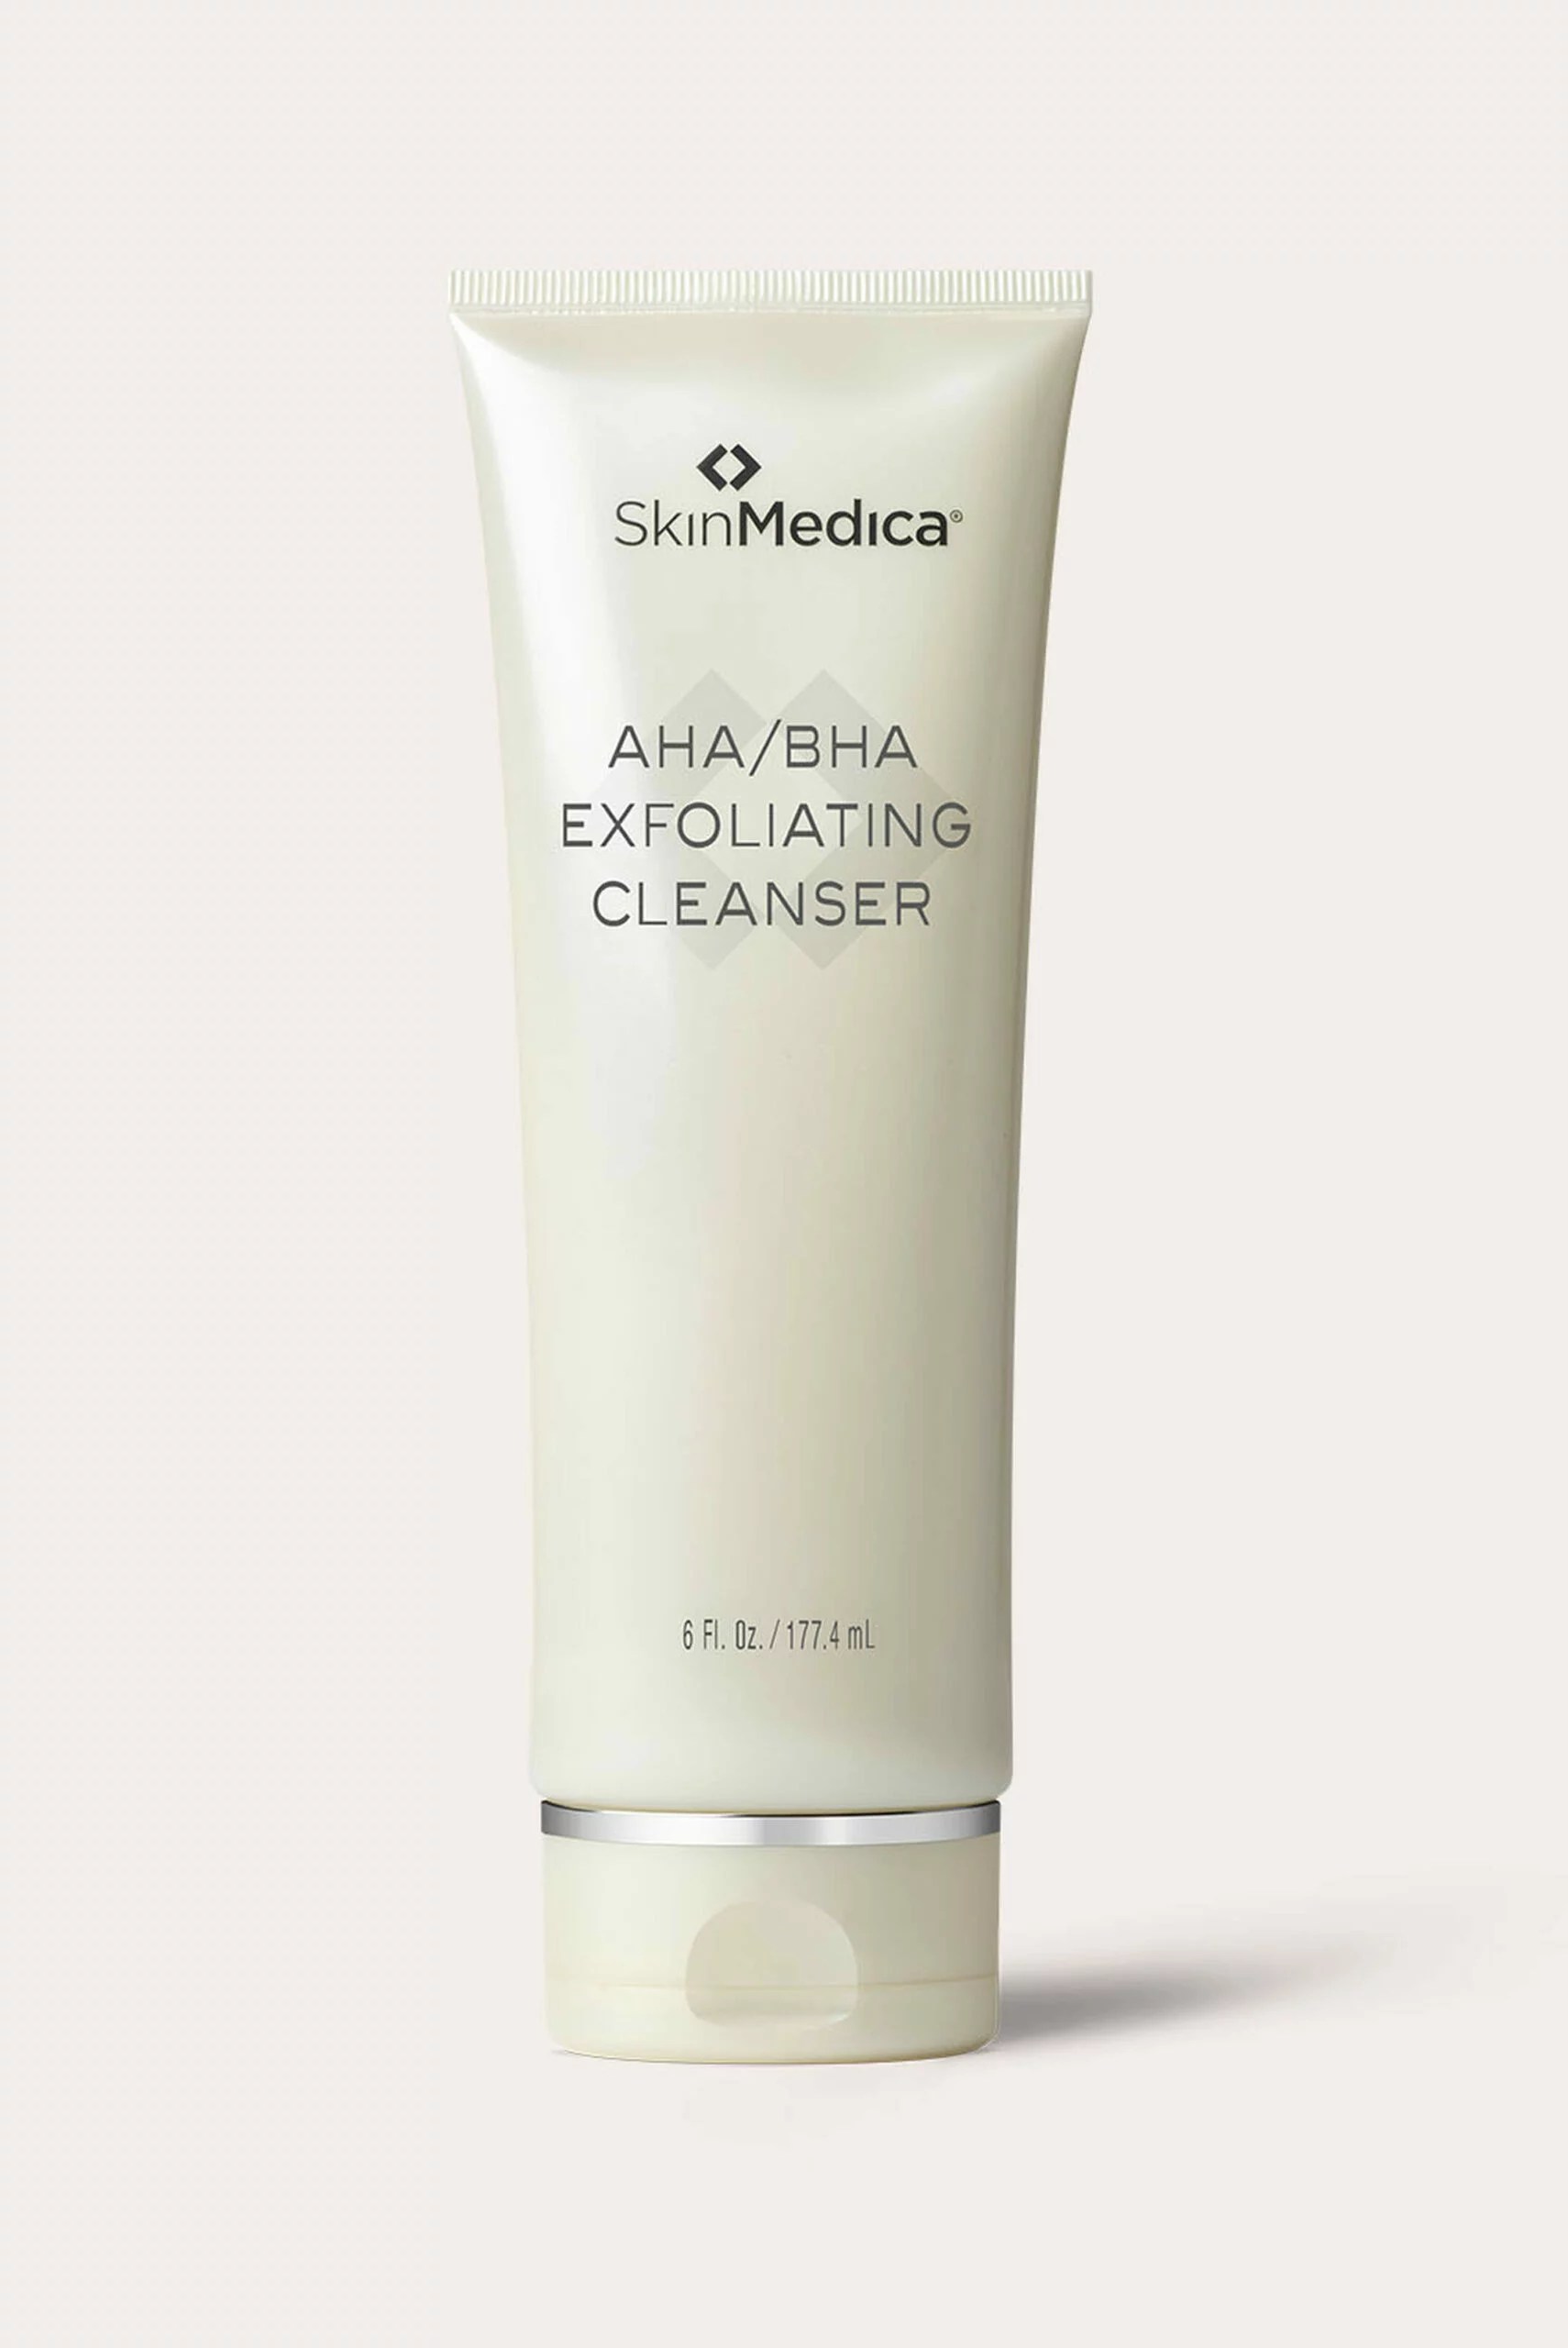 A white bottle of SkinMedica cleanser.